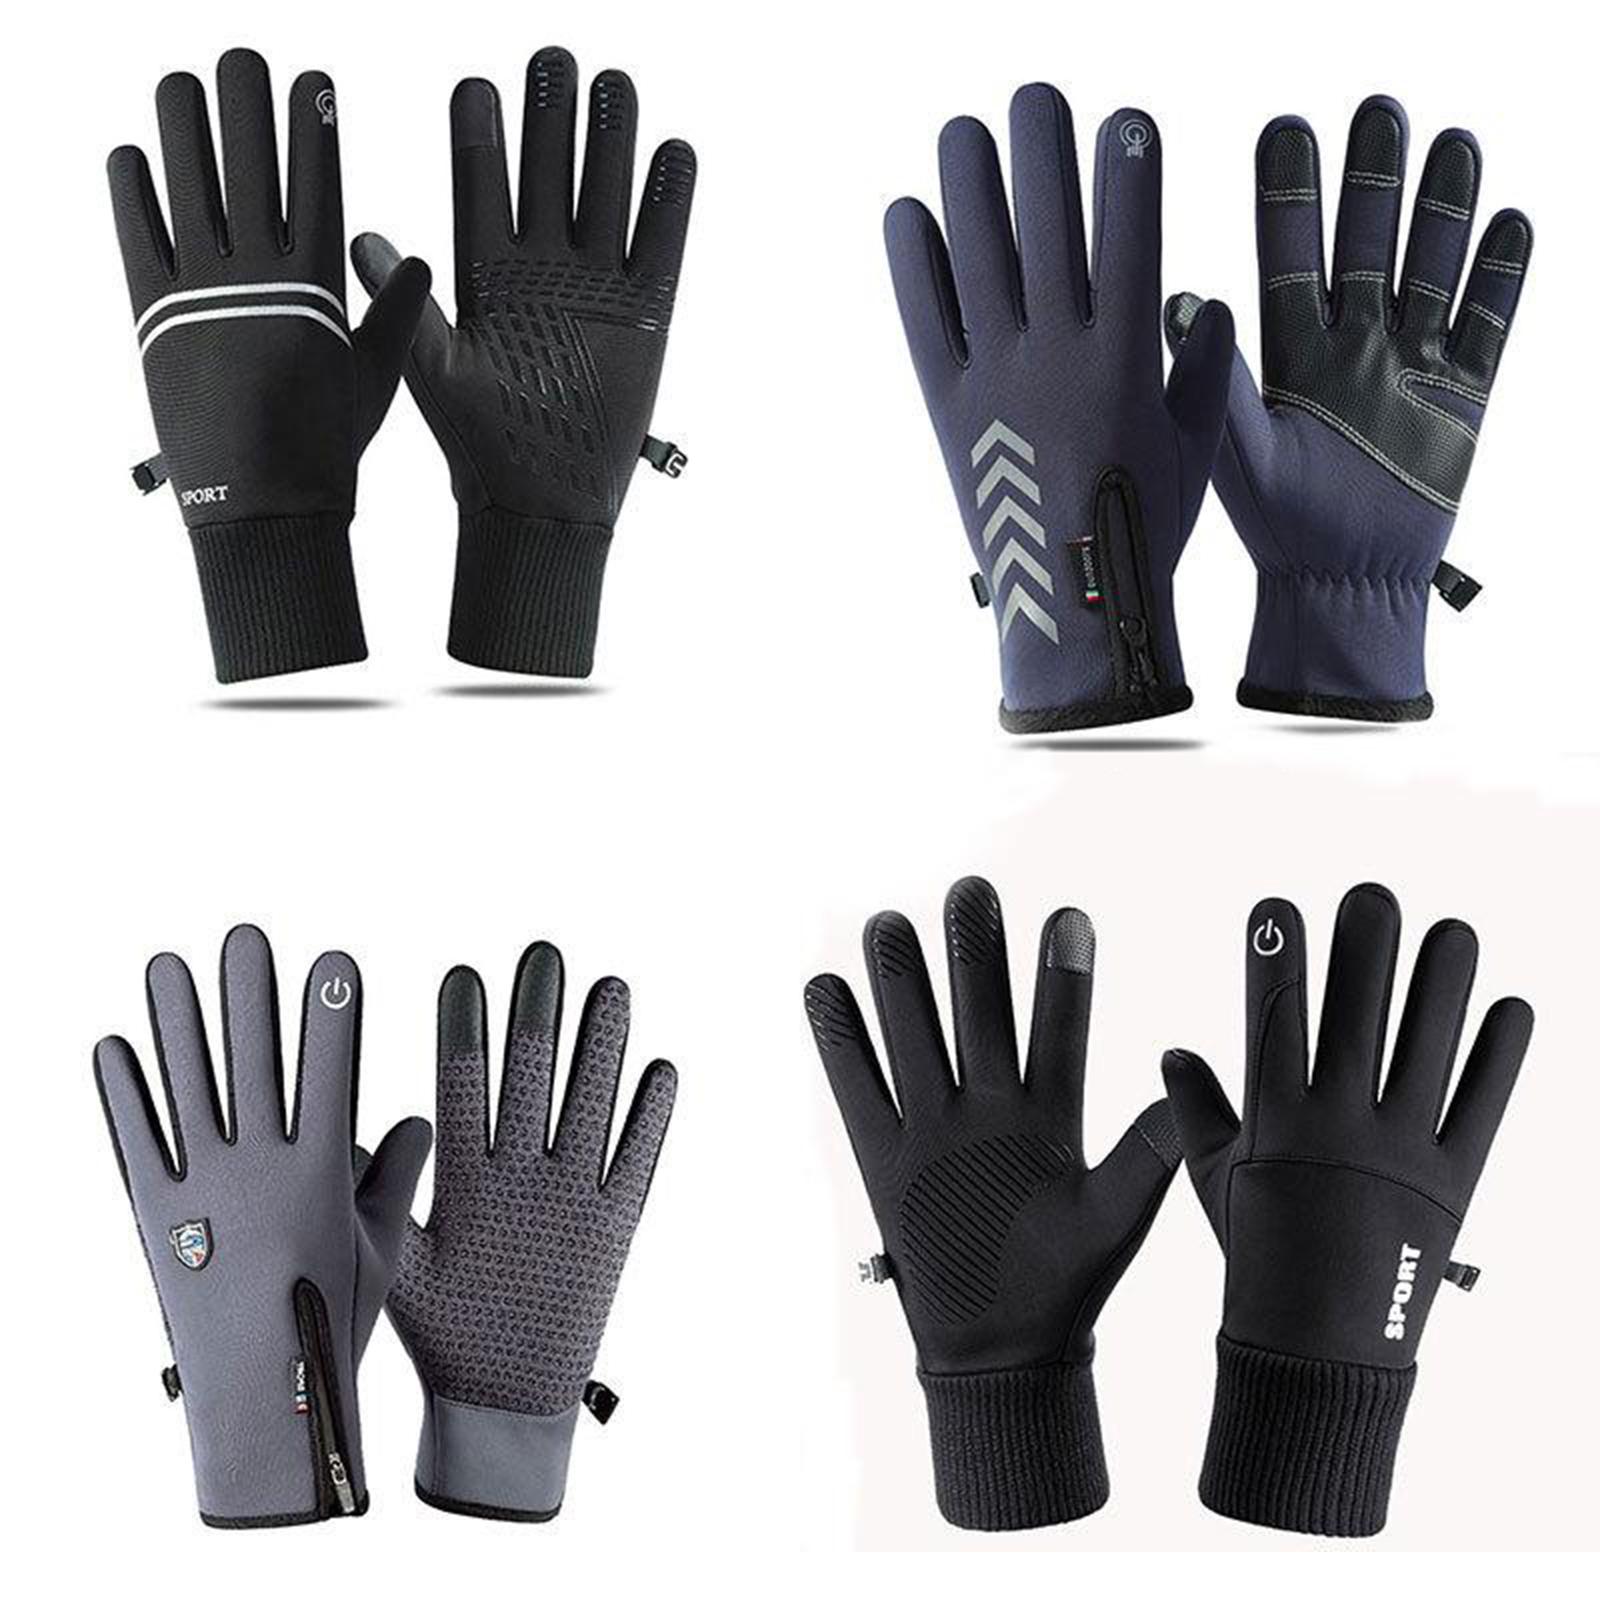 Winter Outdoor Cycling Hiking Sports Gloves Touch Screen L Navy Blue K111